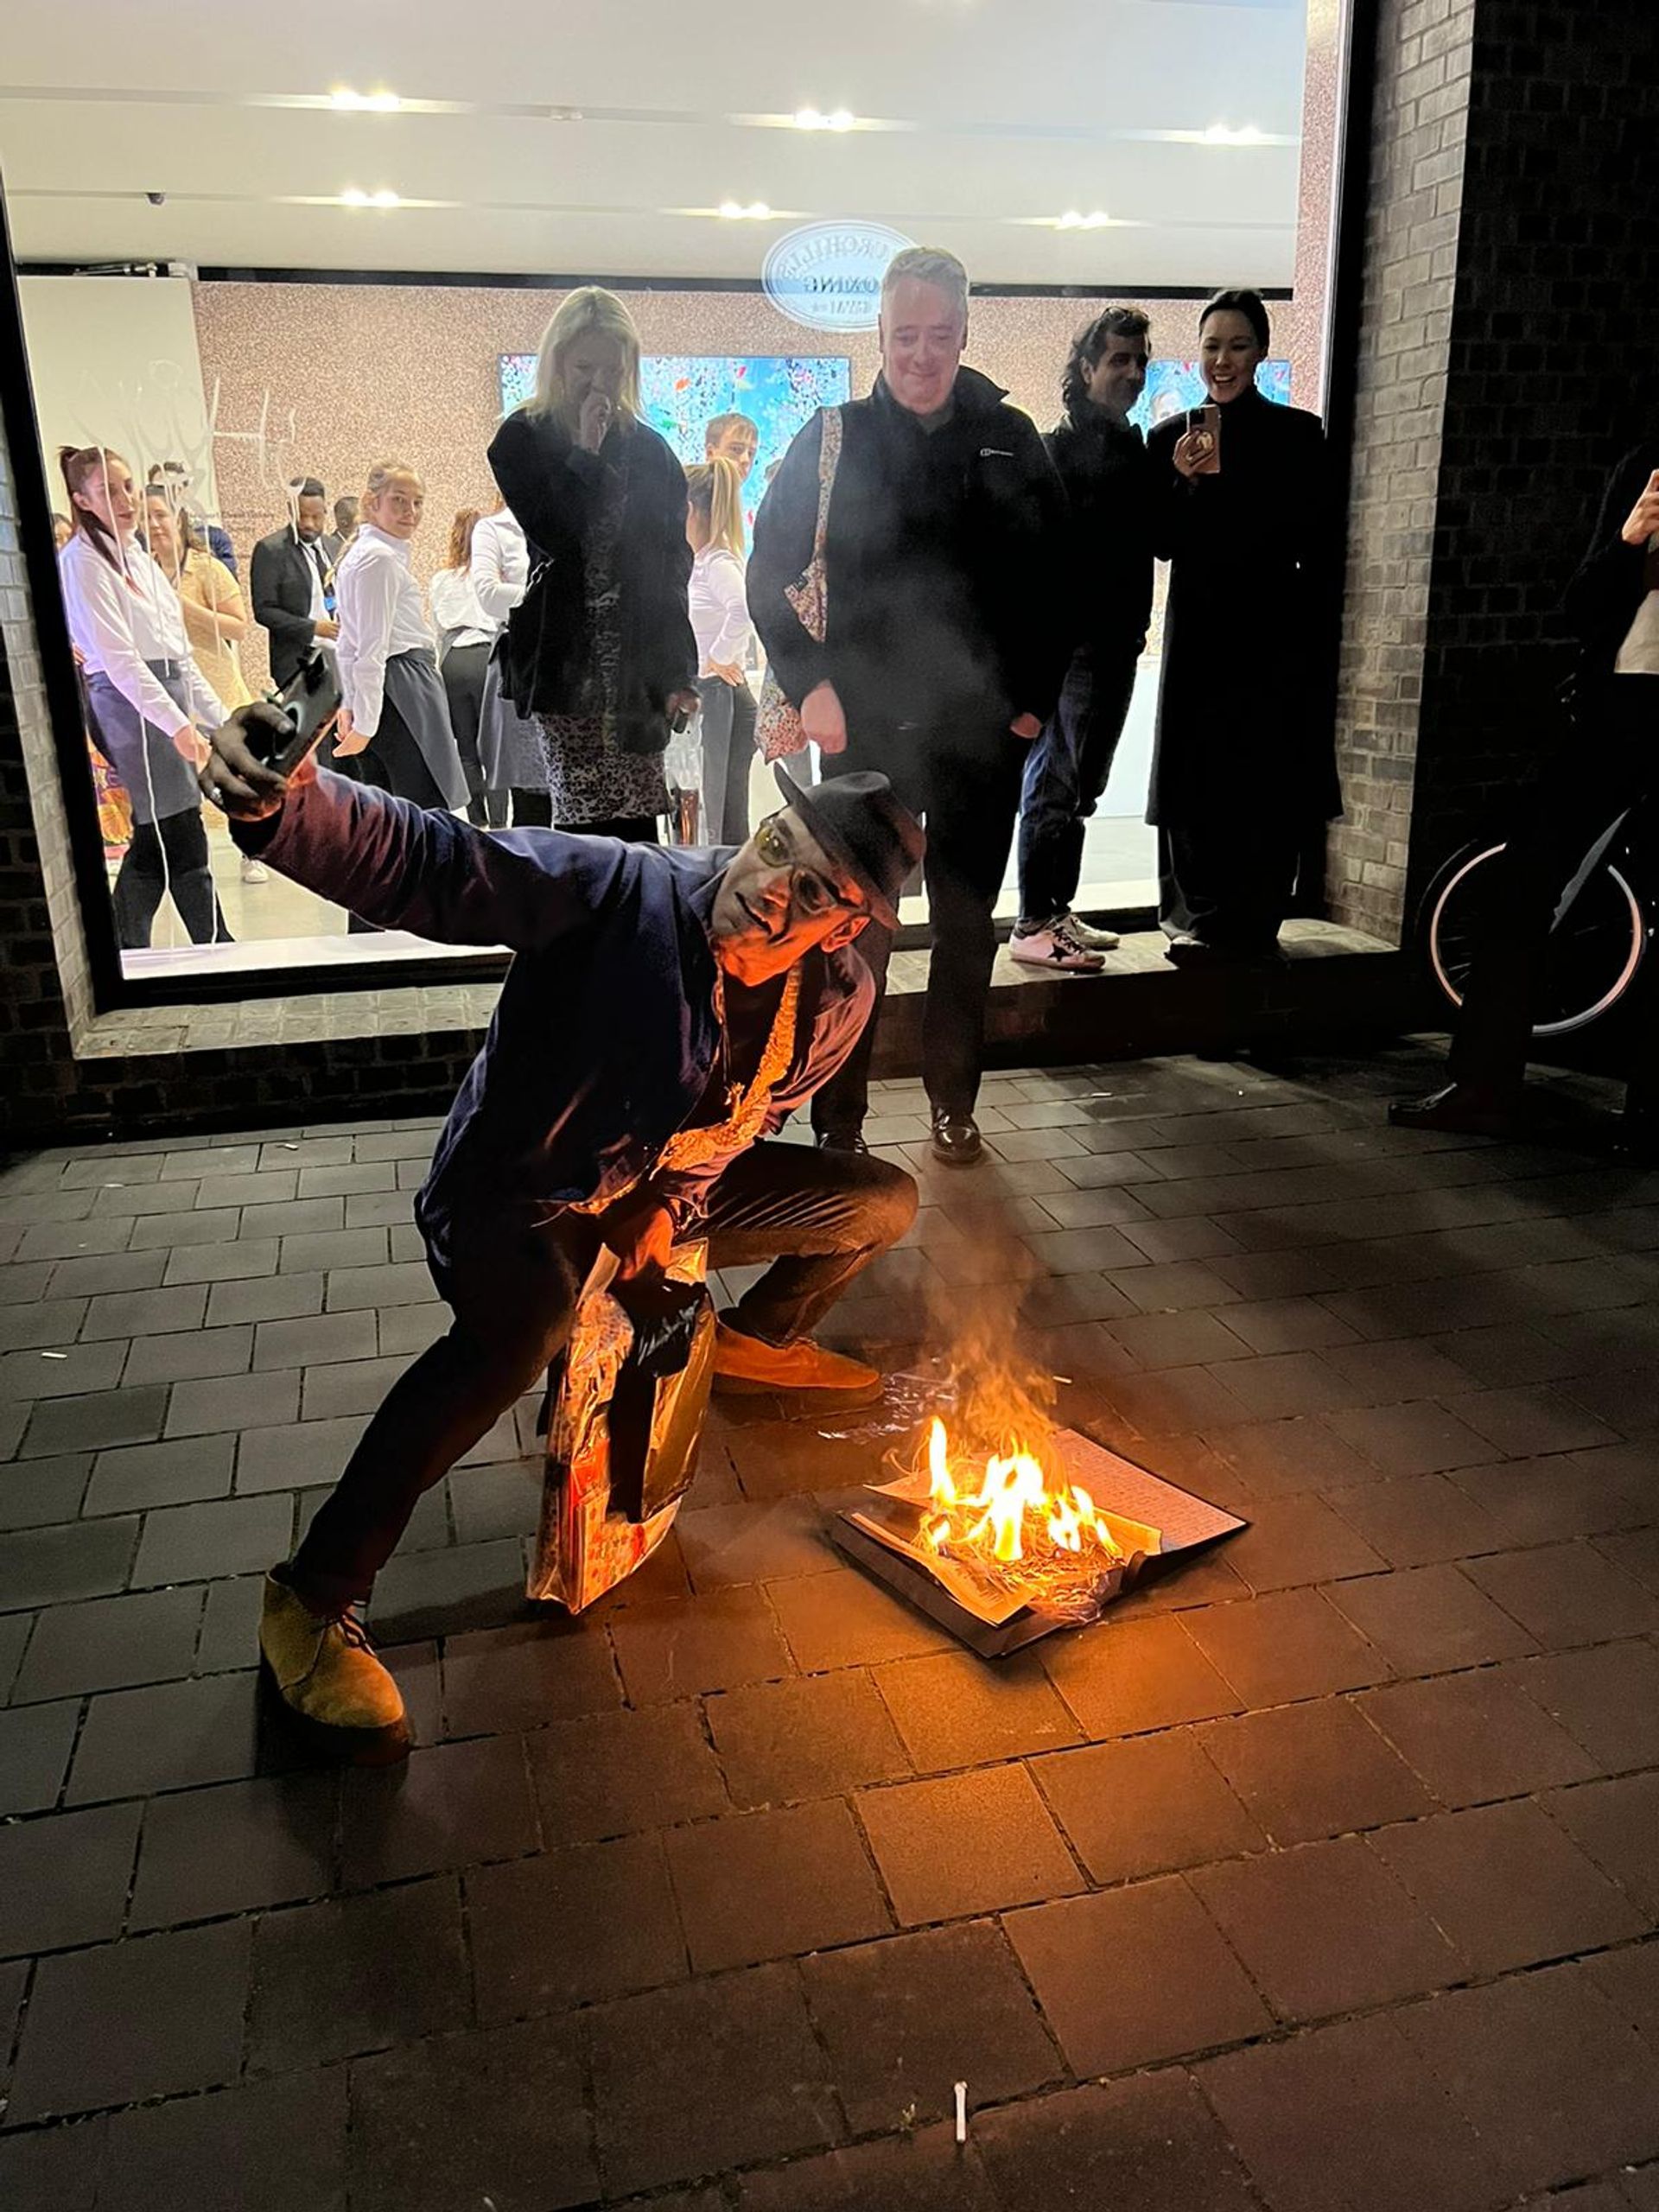 An artist set fire to a Damien Hirst exhibition catalogue outside Newport Street Gallery.

Photo: Amelia Webb